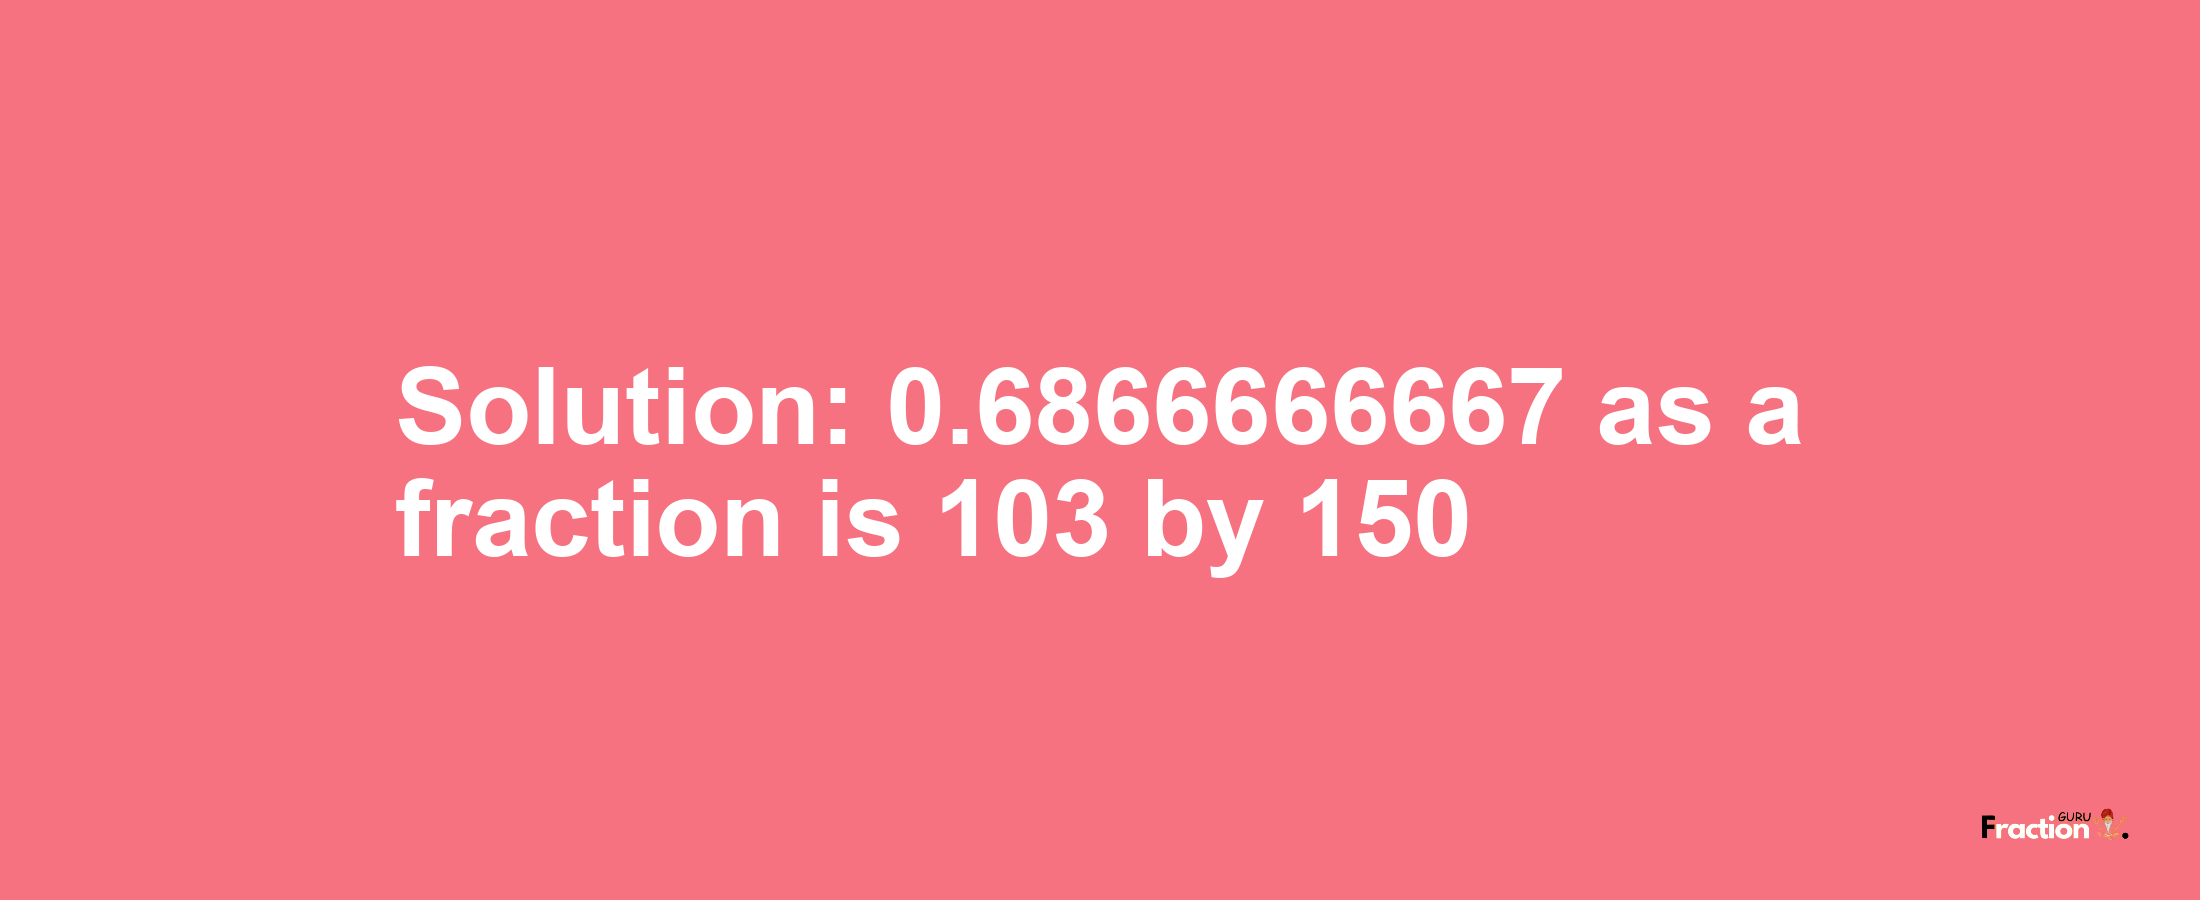 Solution:0.6866666667 as a fraction is 103/150